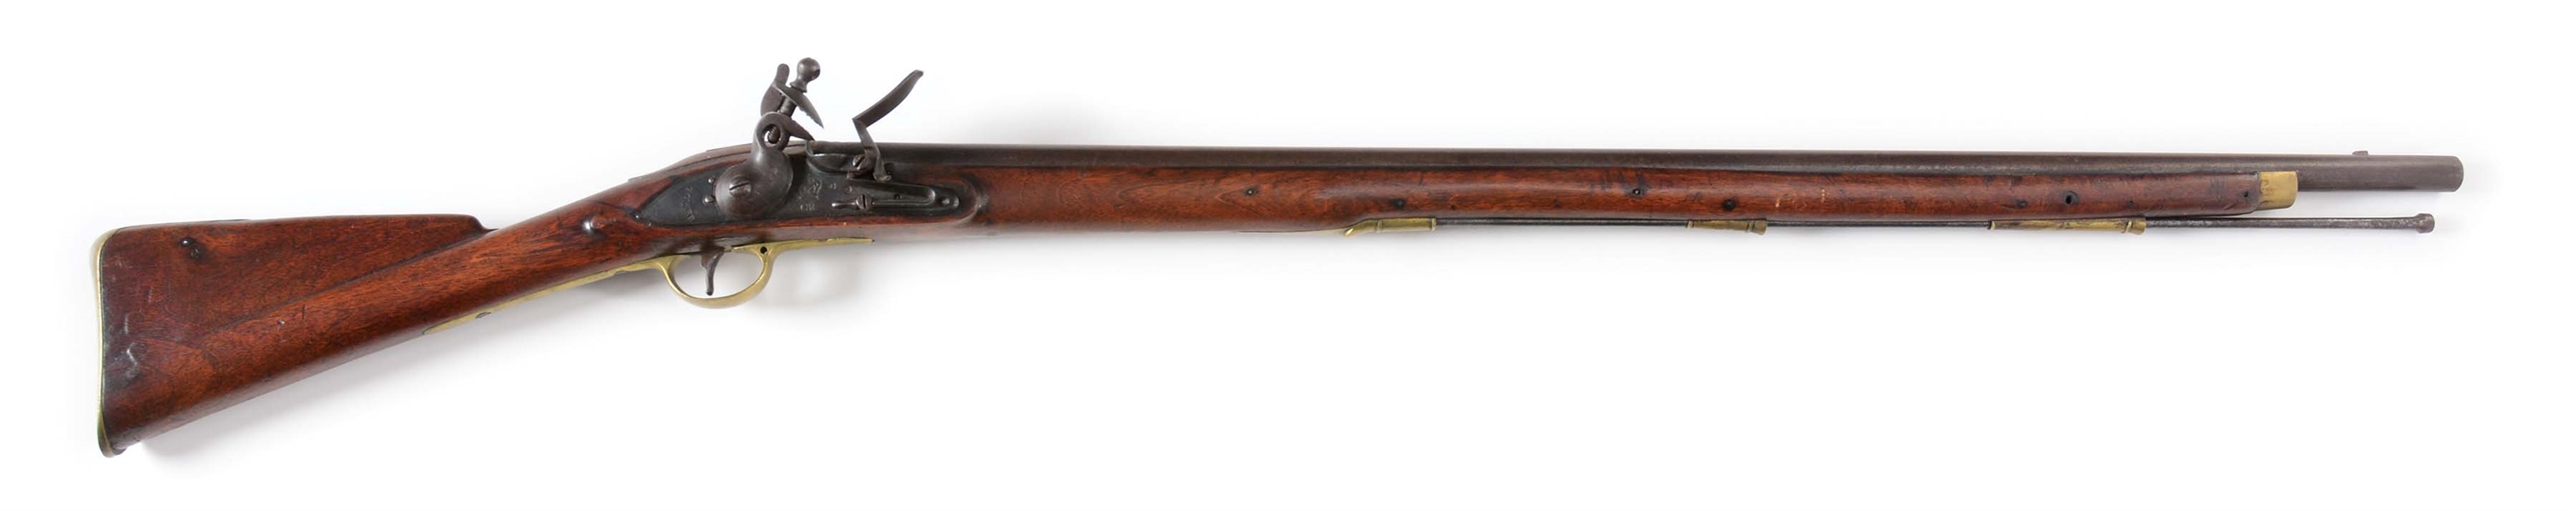 (A) BRITISH 3RD MODEL BROWN BESS MUSKET.